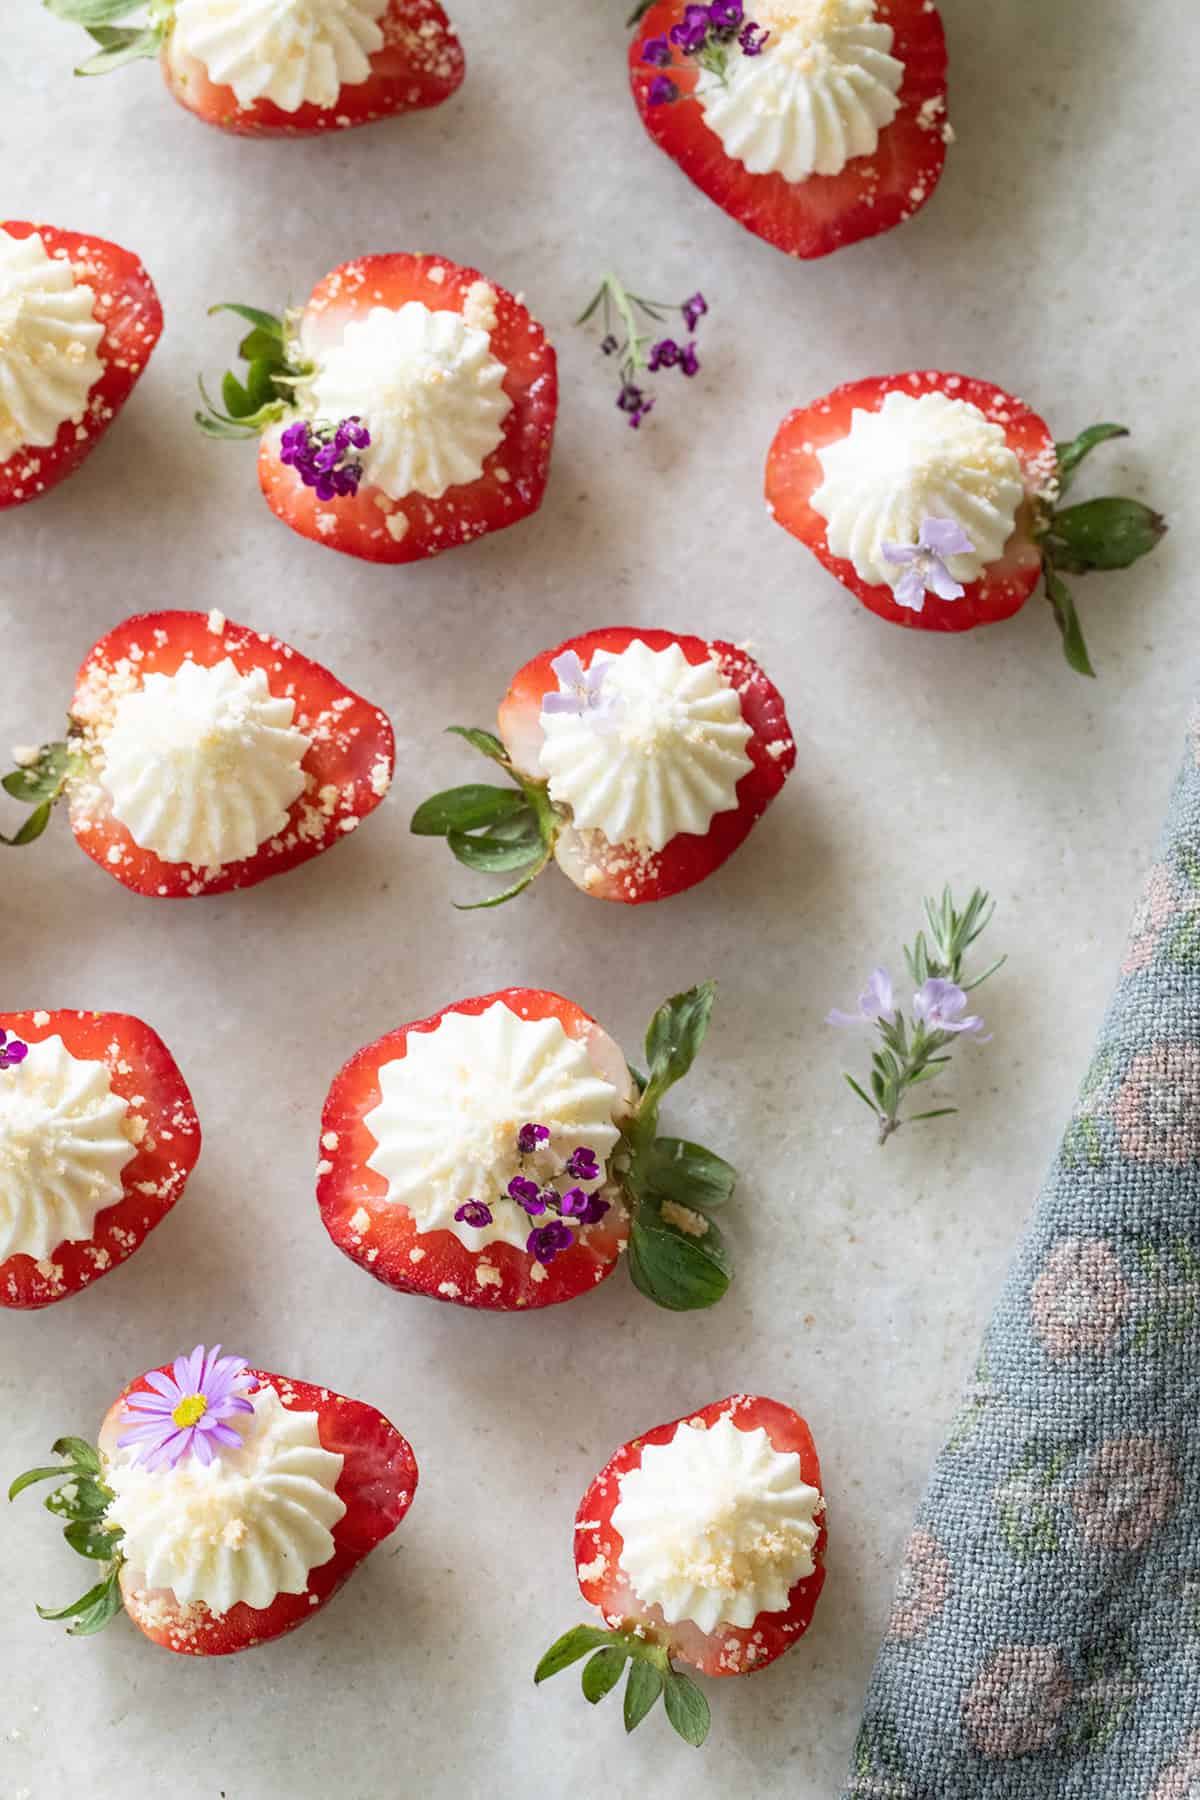 Deviled strawberry party appetizer with whipped cheesecake.